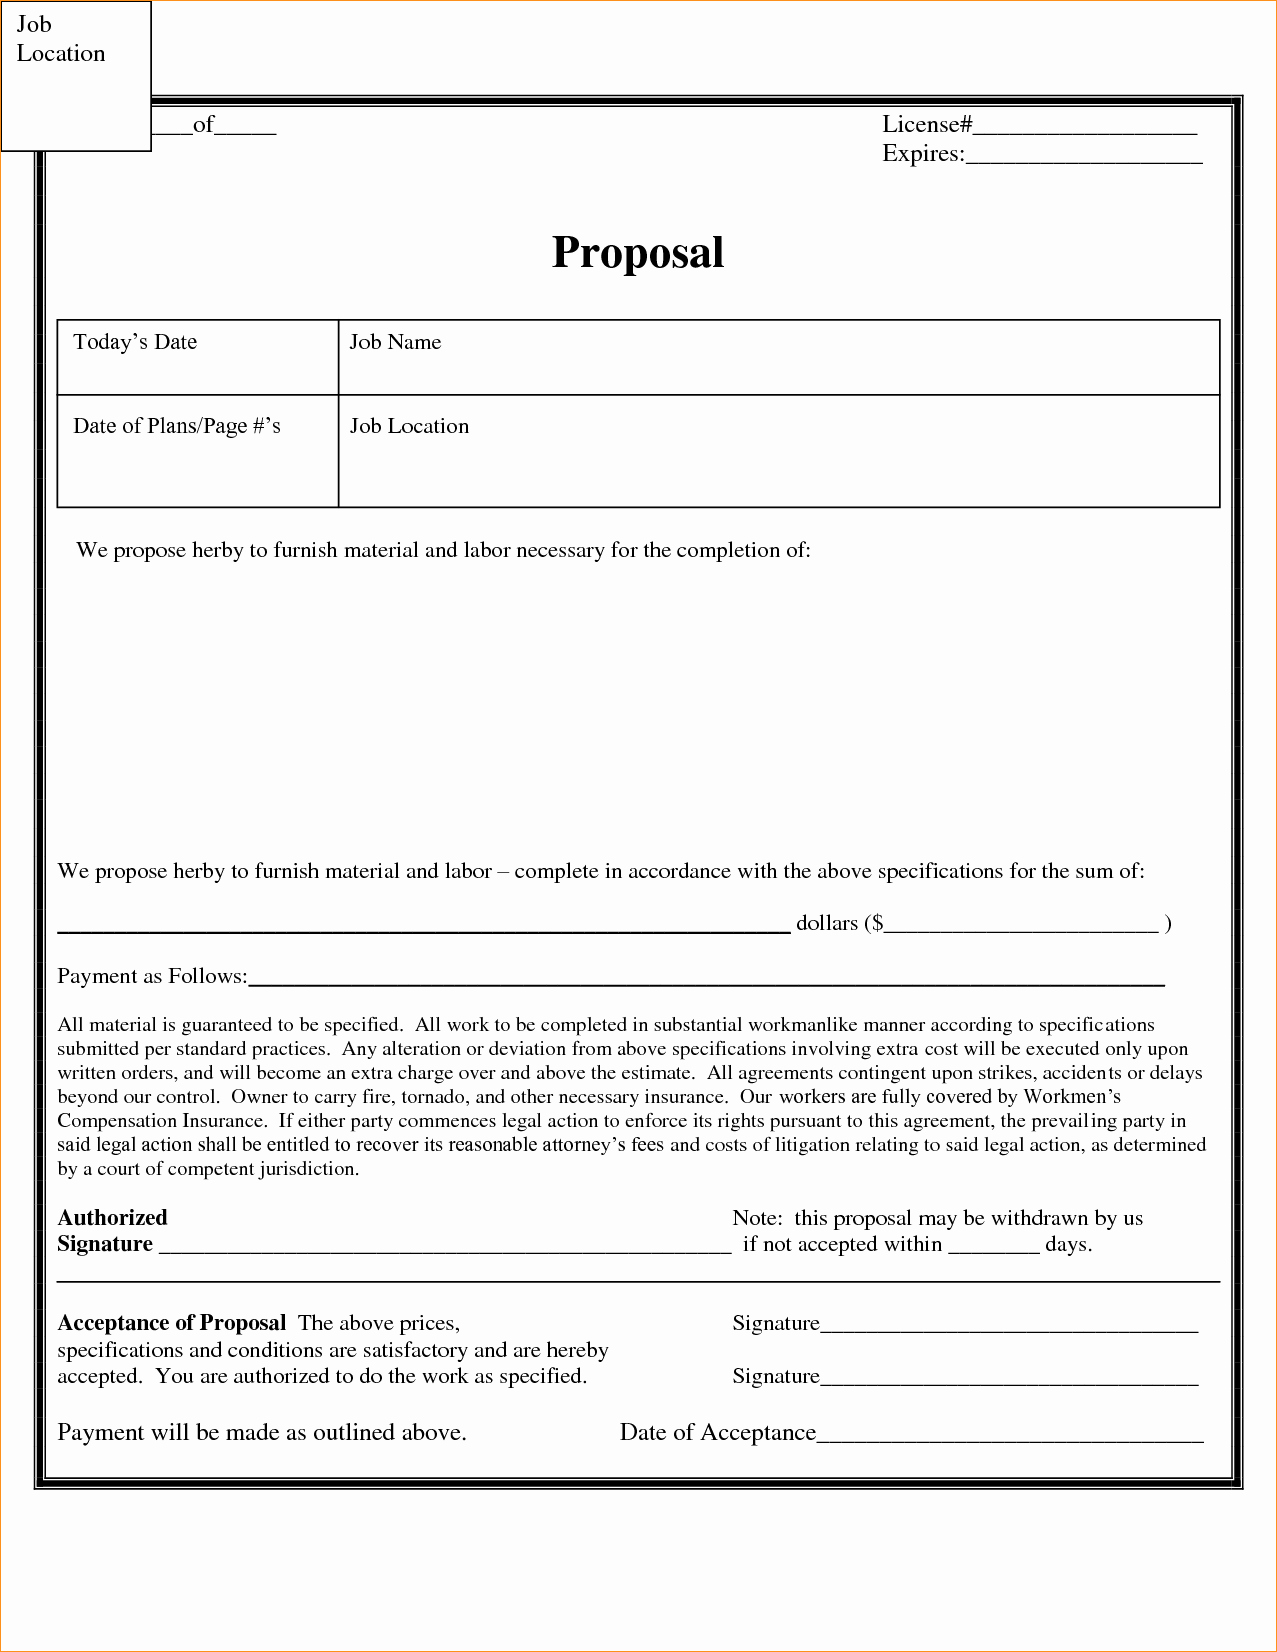 Free Proposal form Template Best Of Proposal Template Free Business Proposal Templated